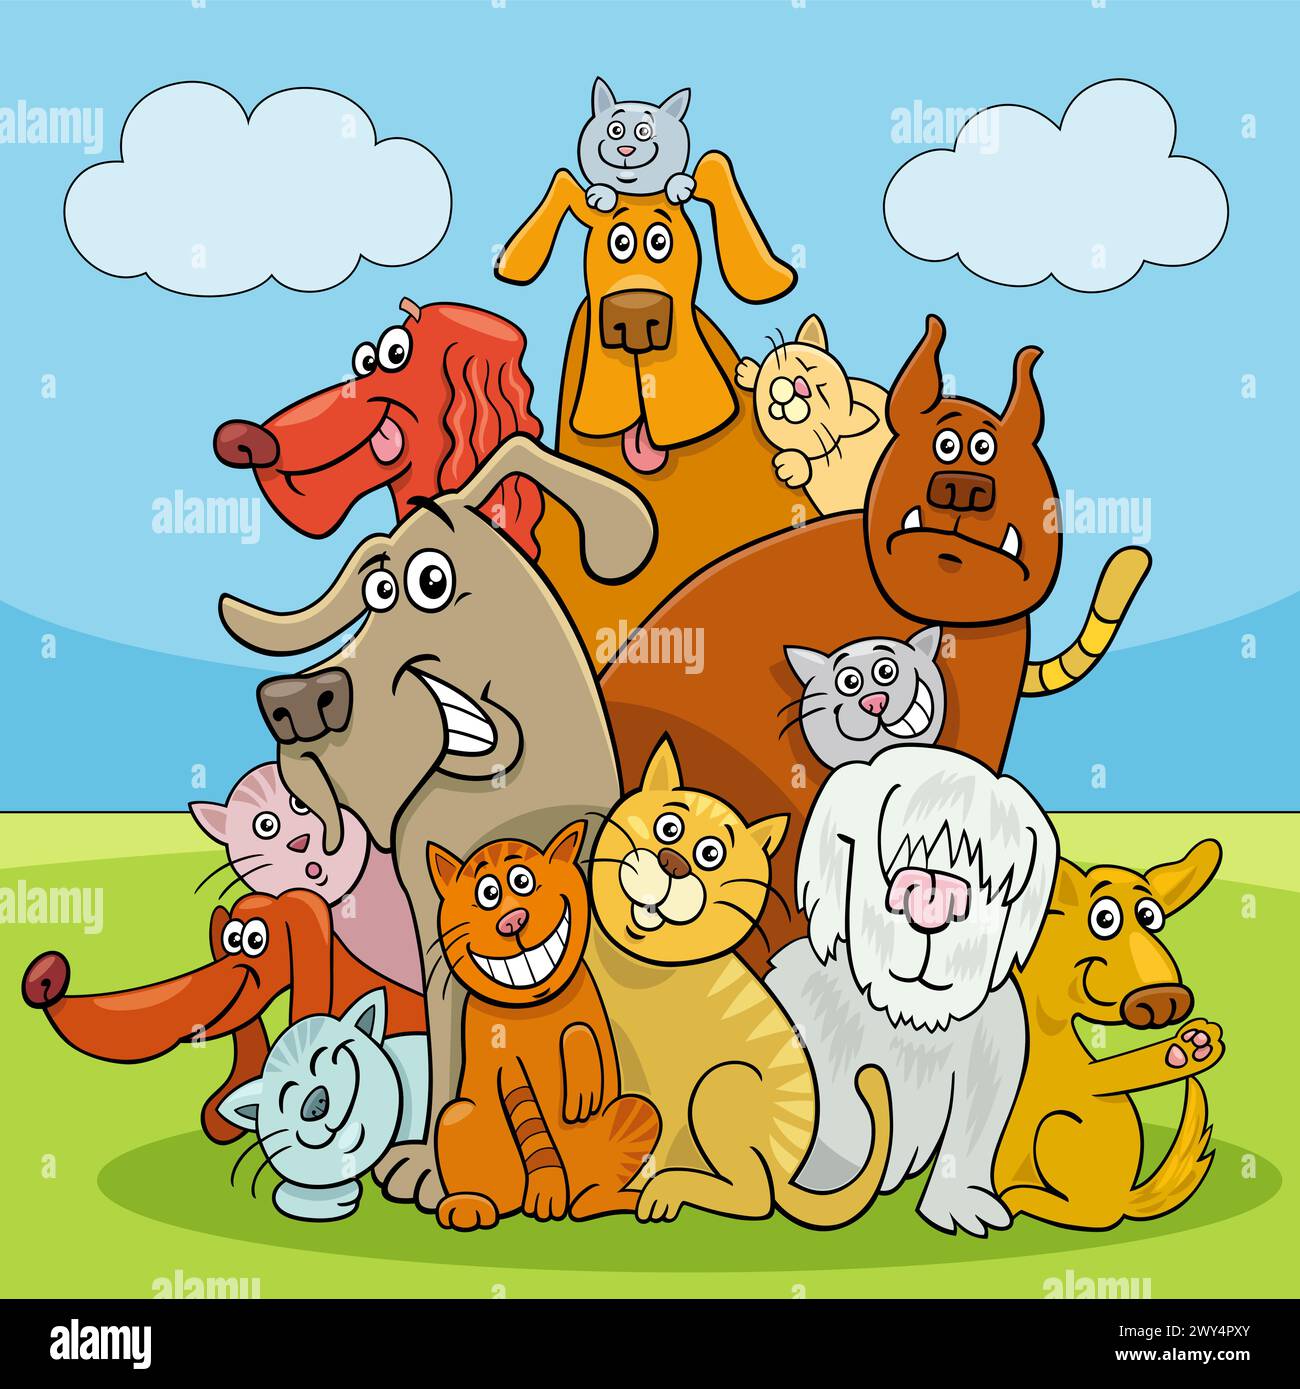 Cartoon illustration of cats and dogs animal characters group Stock Vector